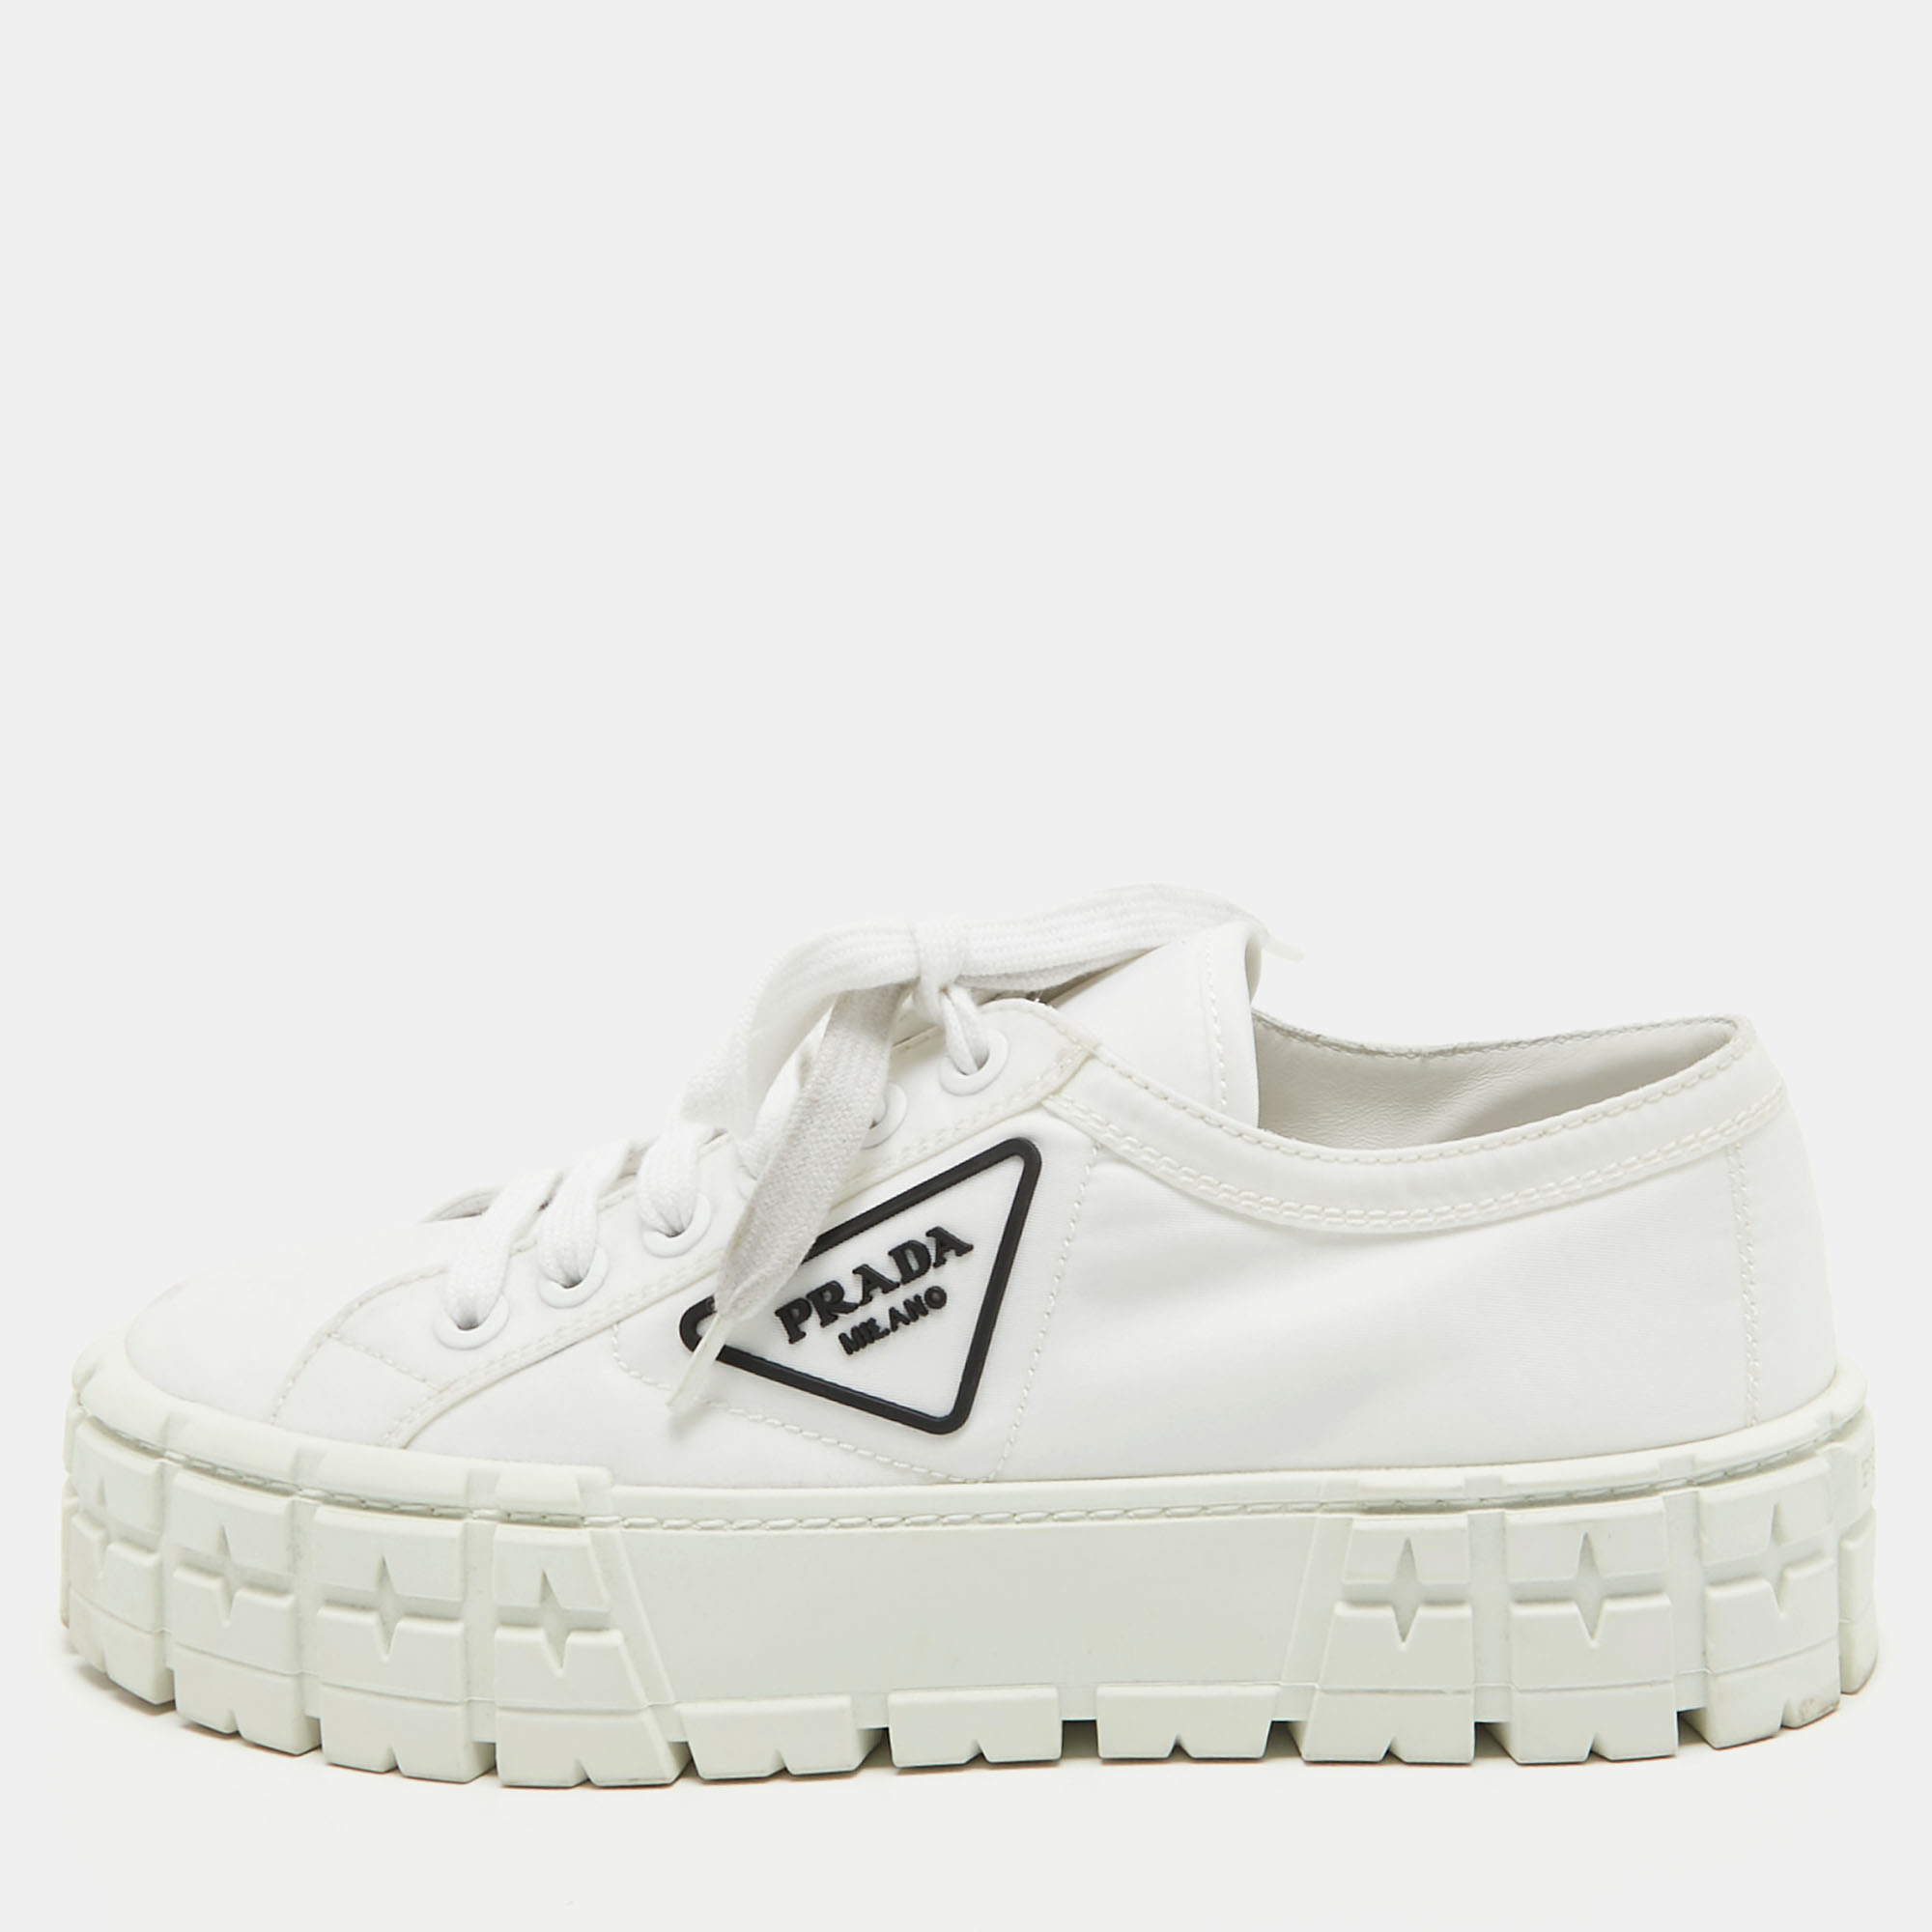 Step into fashion forward luxury with these Prada white sneakers. These premium kicks offer a harmonious blend of style and comfort perfect for those who demand sophistication in every step.